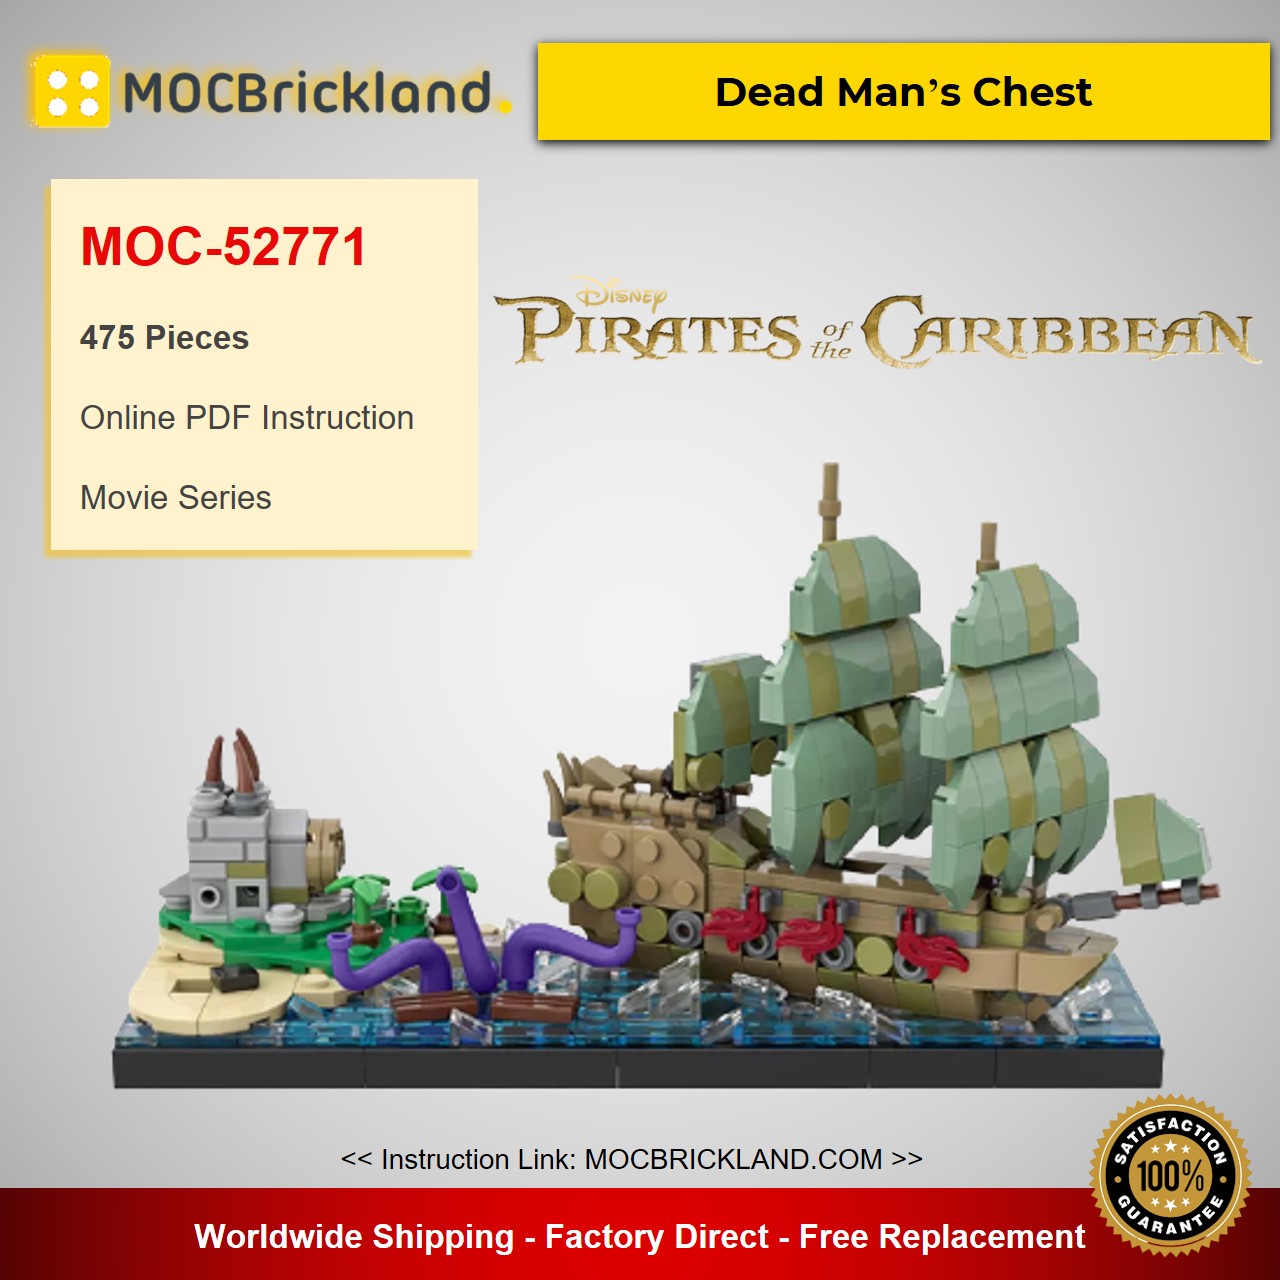 MOCBRICKLAND MOC-52771 Pirates of the Caribbean Dead Man’s Chest